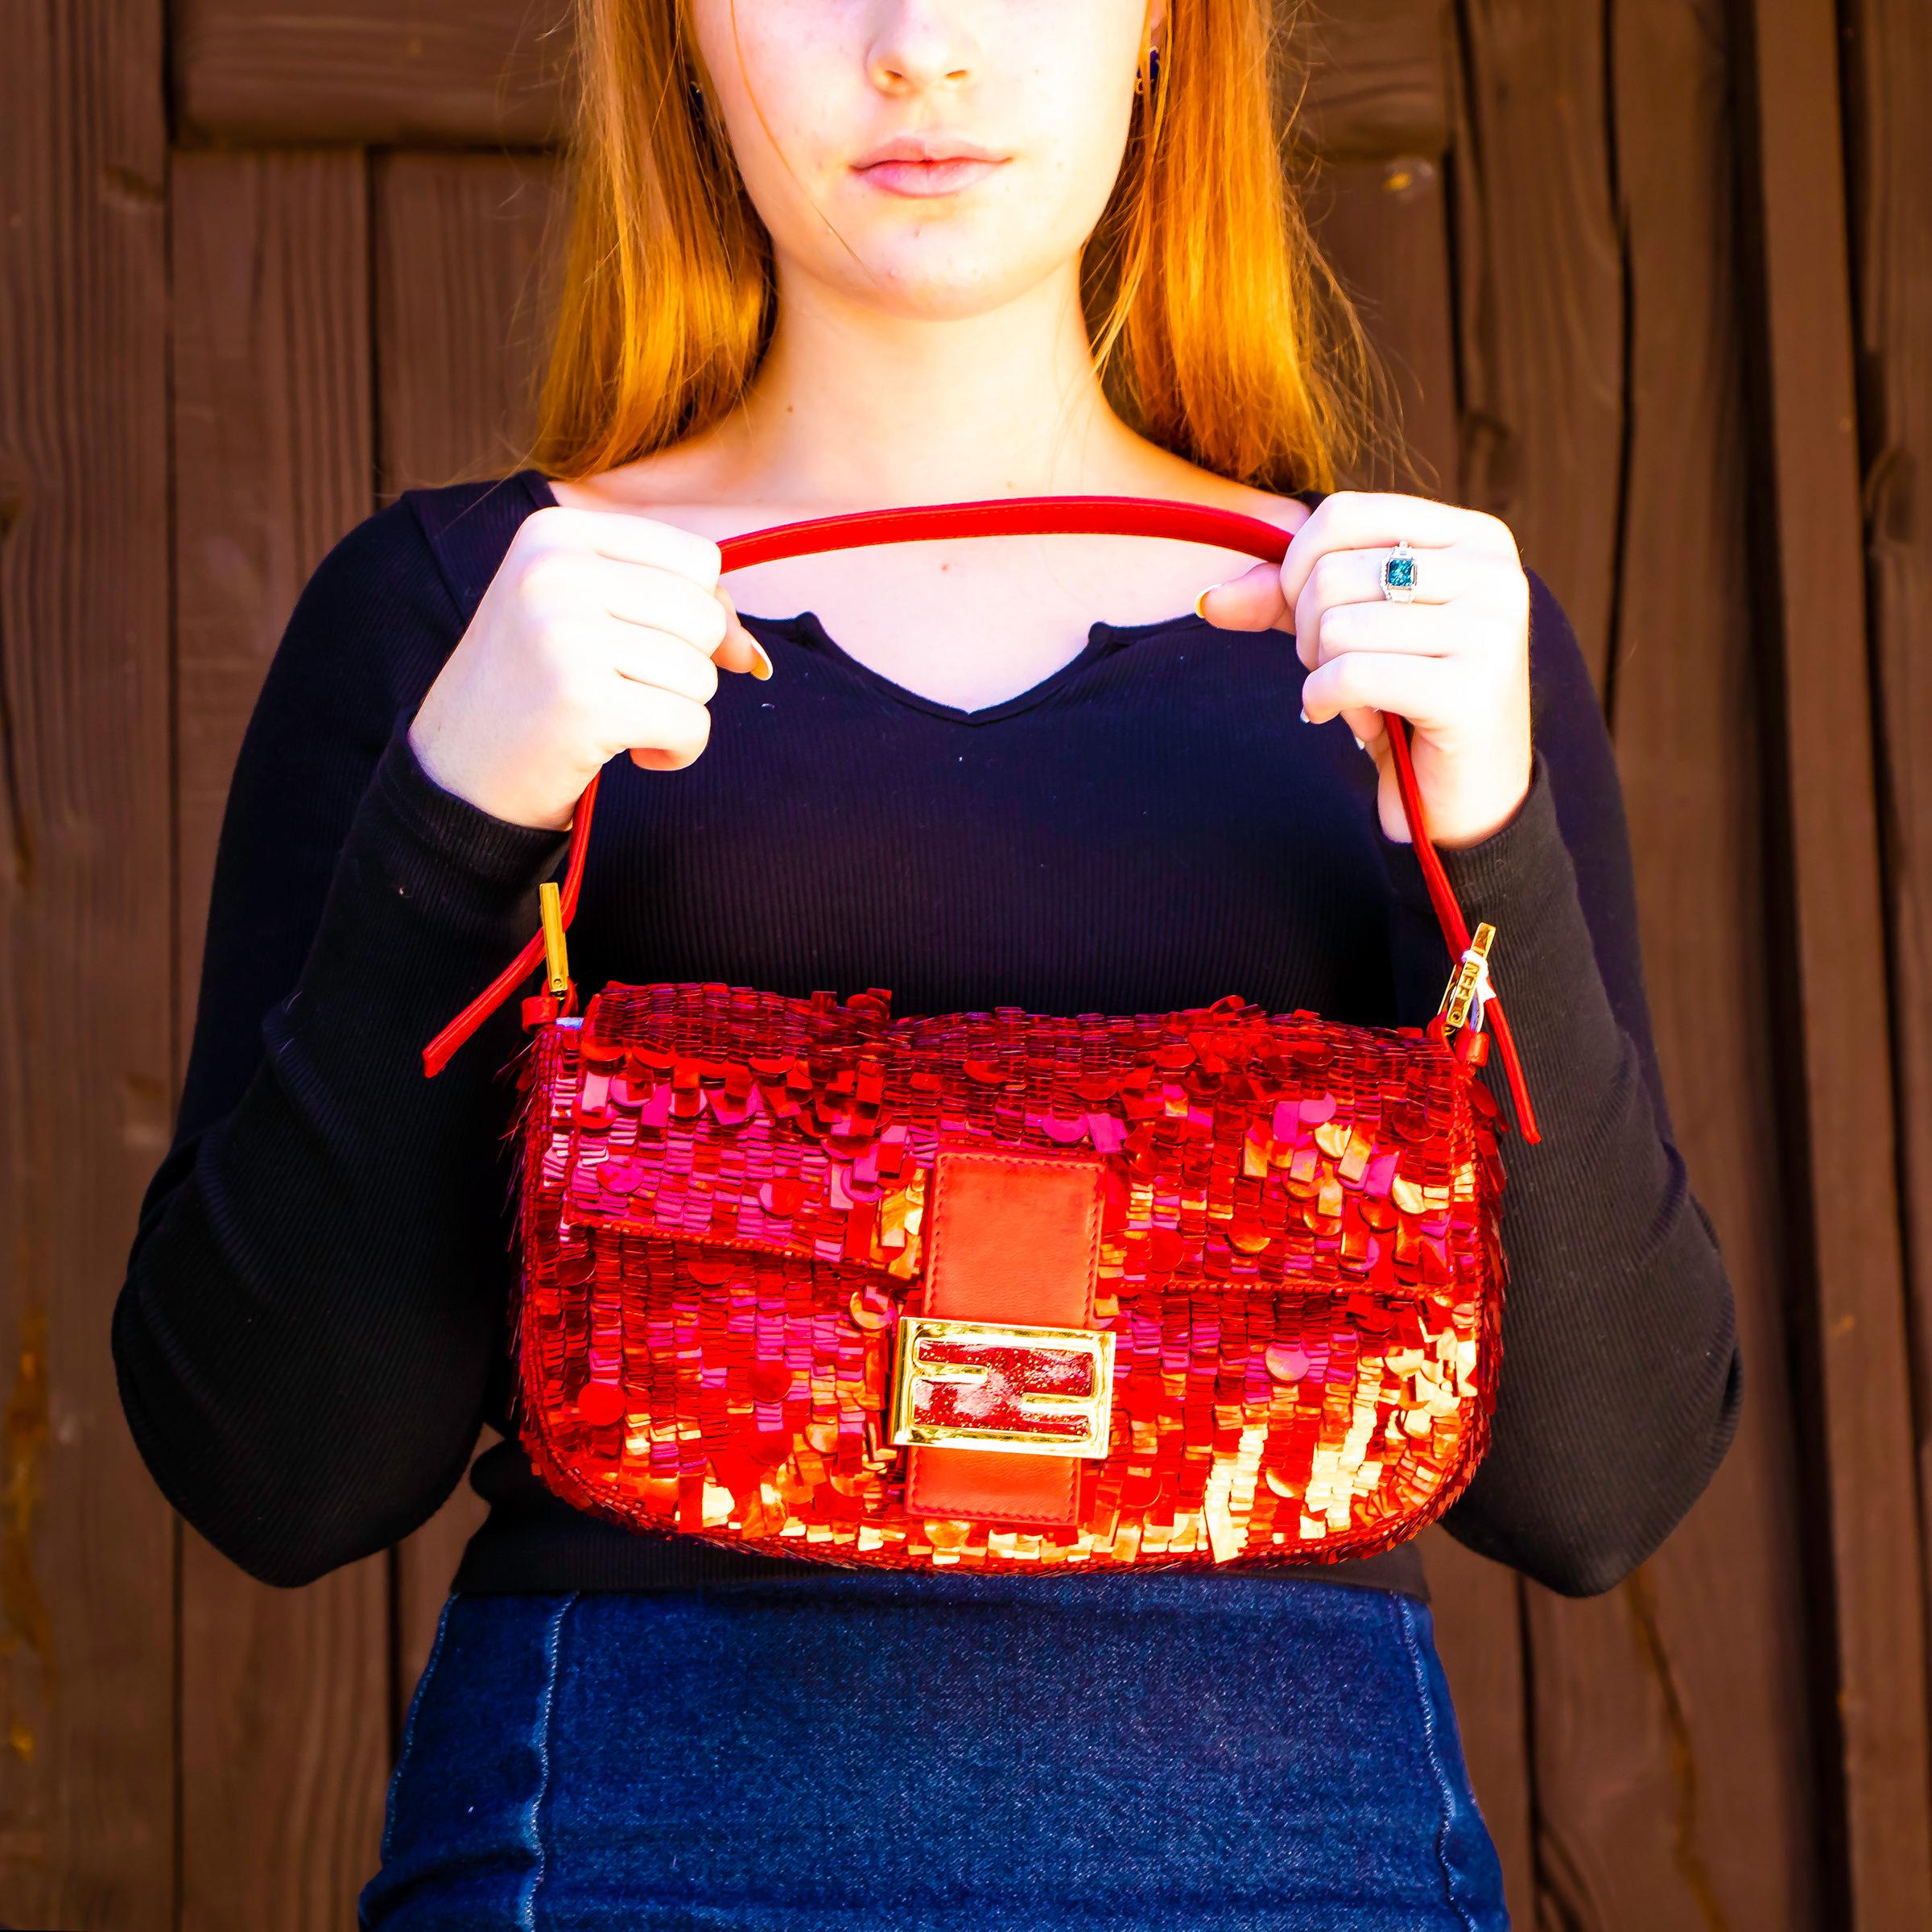 Beautiful red Fendi sequence clutch with matching strap. This bag has one main pocket with one small zippered section and a deep purple lining. It also has a magnetic closure and red leather accents. Made in Italy.

Height = 6 inches
Width = 11